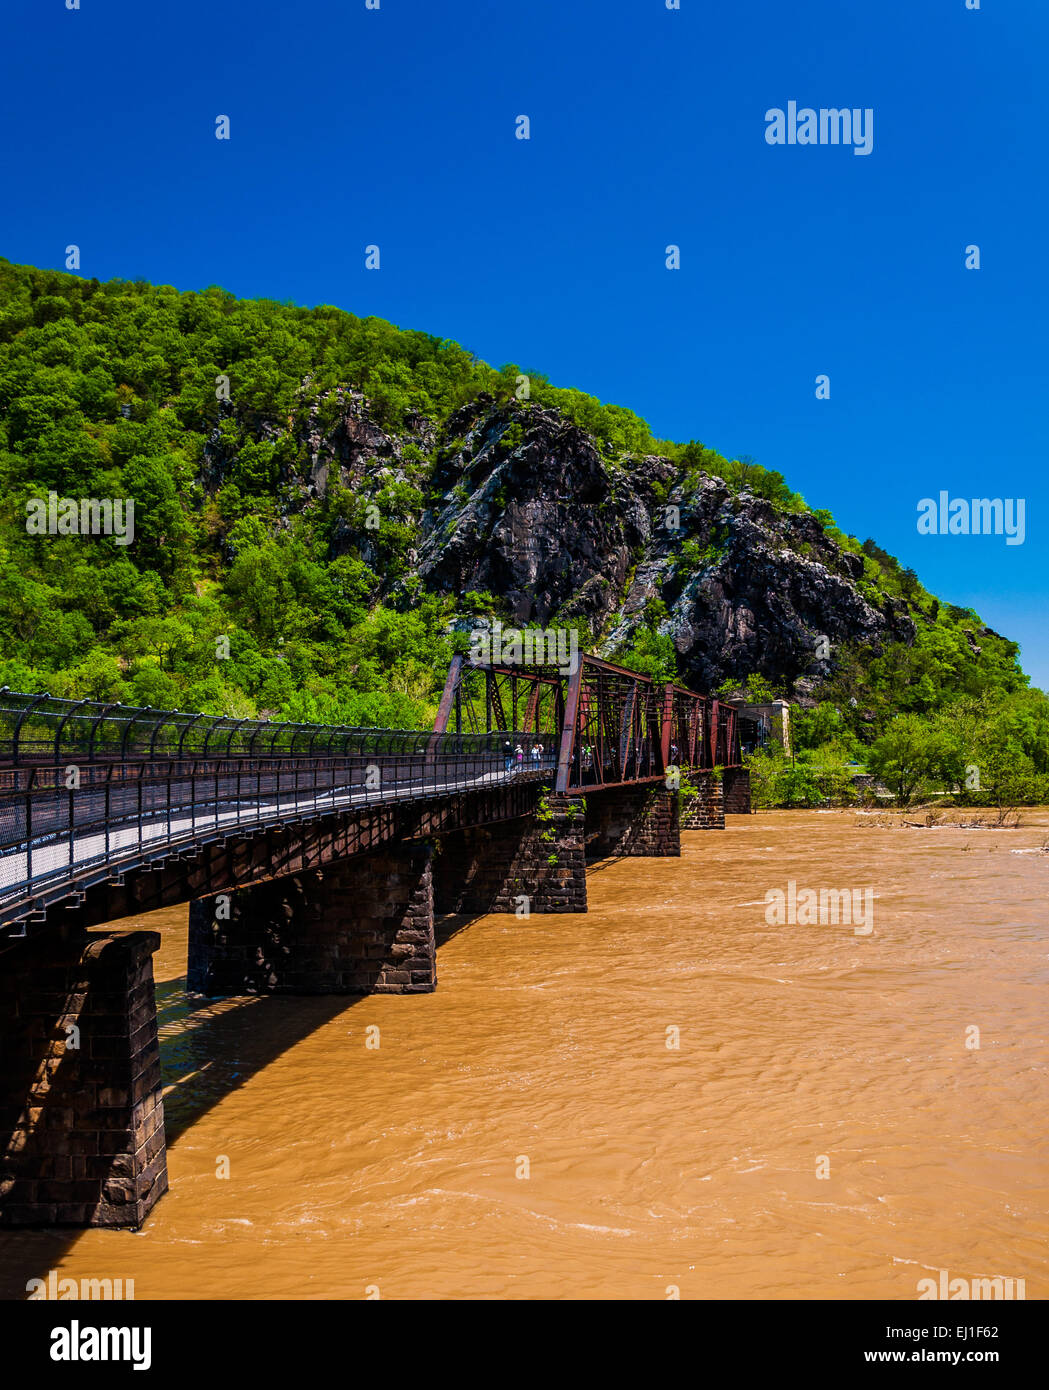 Pedestrian and train bridge across the flooded Potomac River in Harper's Ferry, West Virginia. Stock Photo